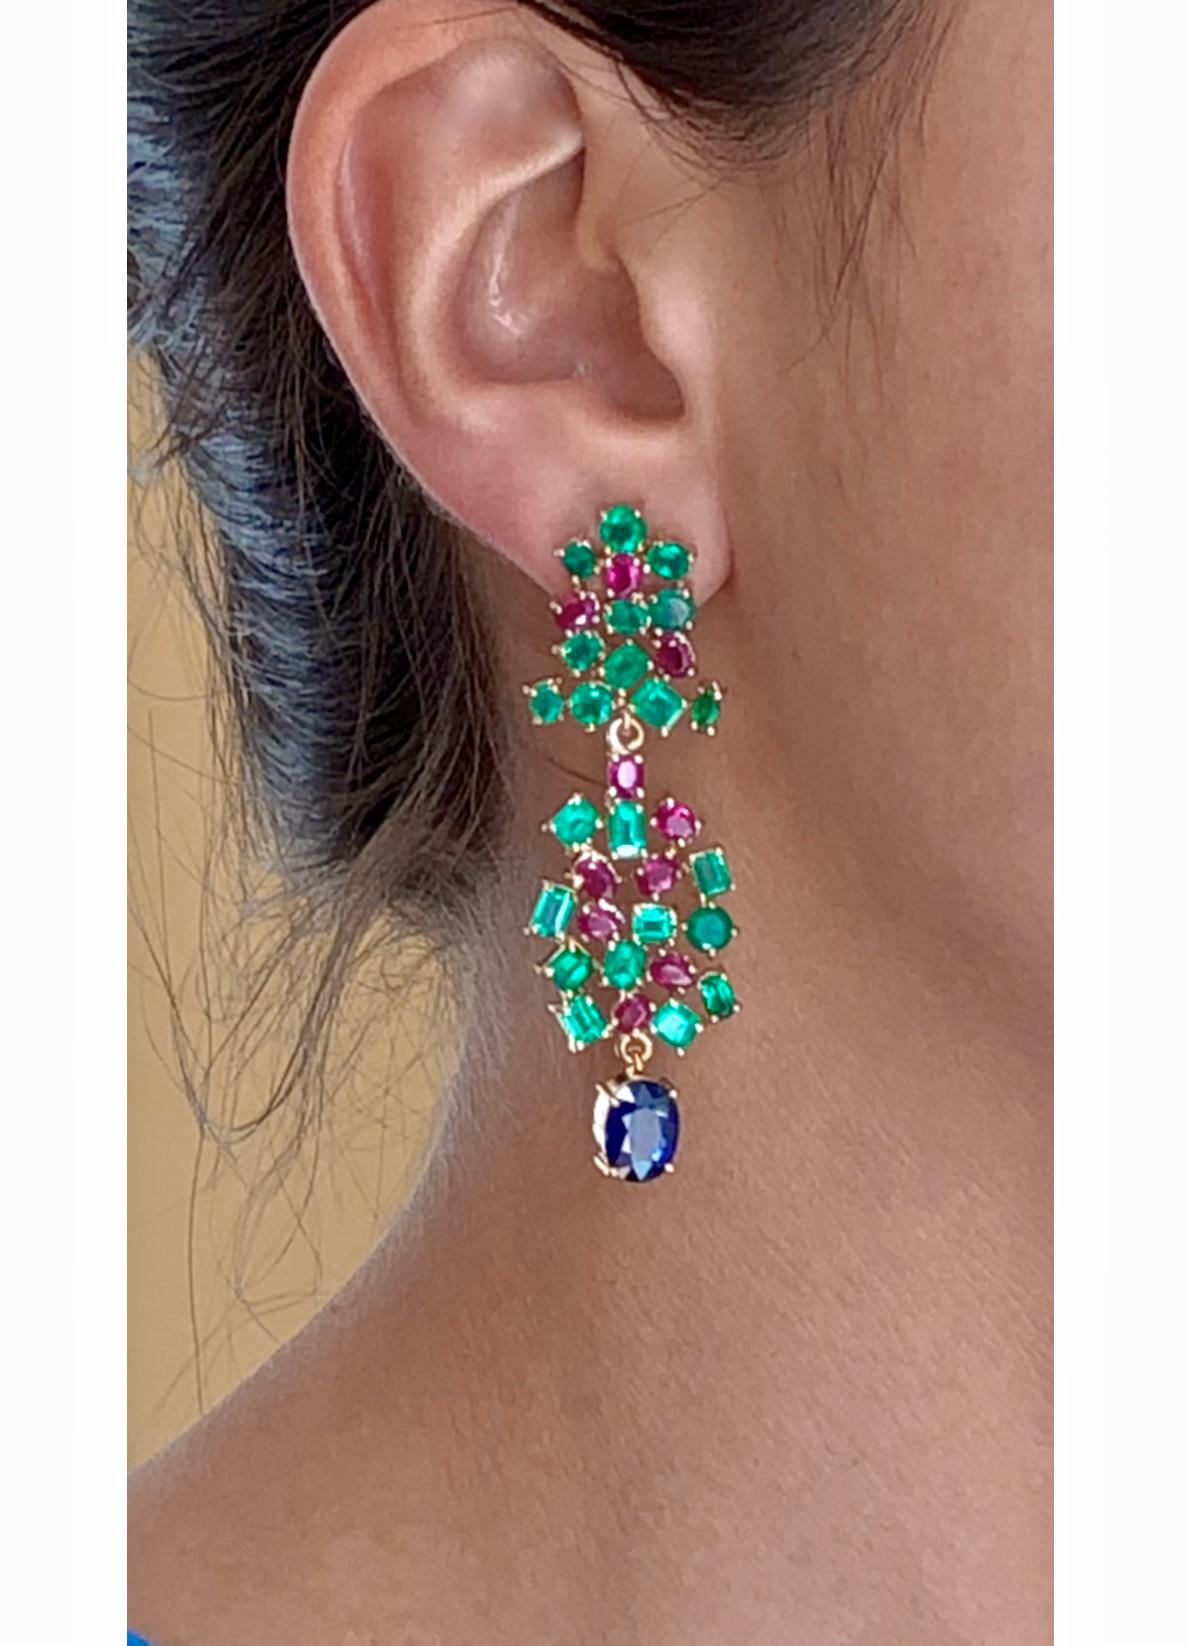 An important Tutti Frutti, faceted Burma sapphires, Colombian emeralds, and Burma rubies are artfully assembled on a stunning pair of chandeliers drop One of a Kind earrings of 18k yellow gold handmade from our Workshop. The earrings features two